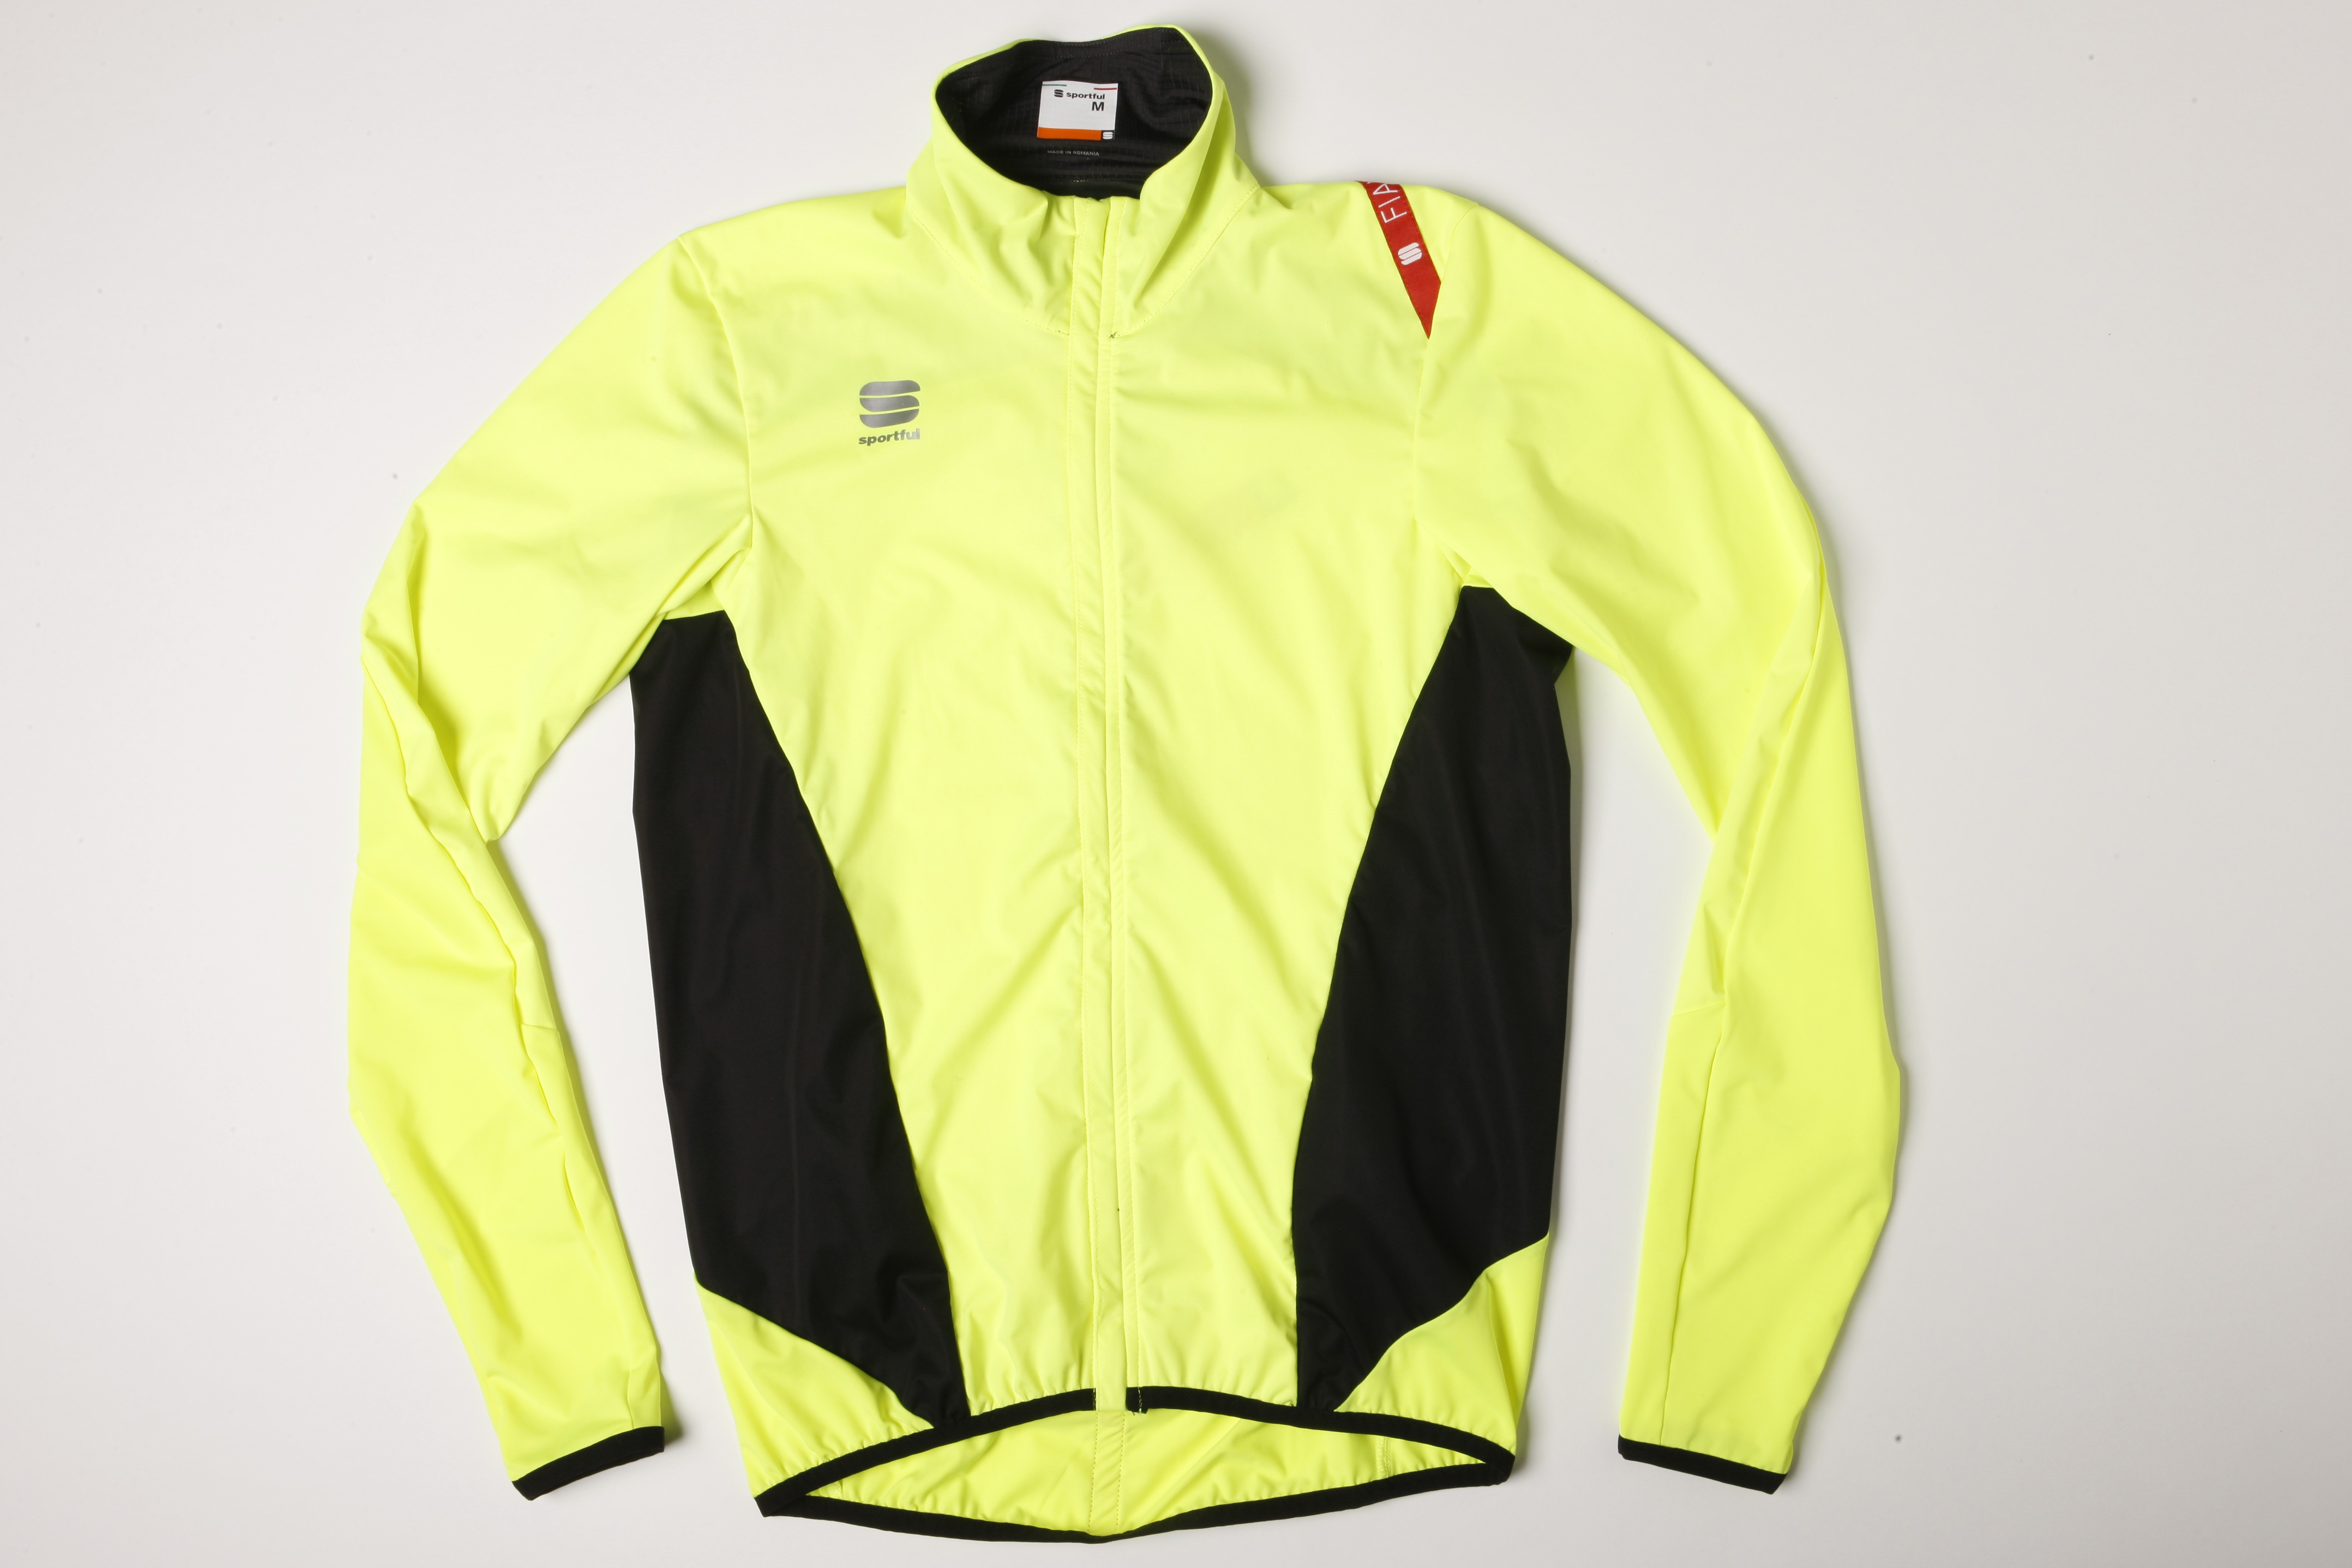 Sportful Light NoRain Top review | Cycling Weekly